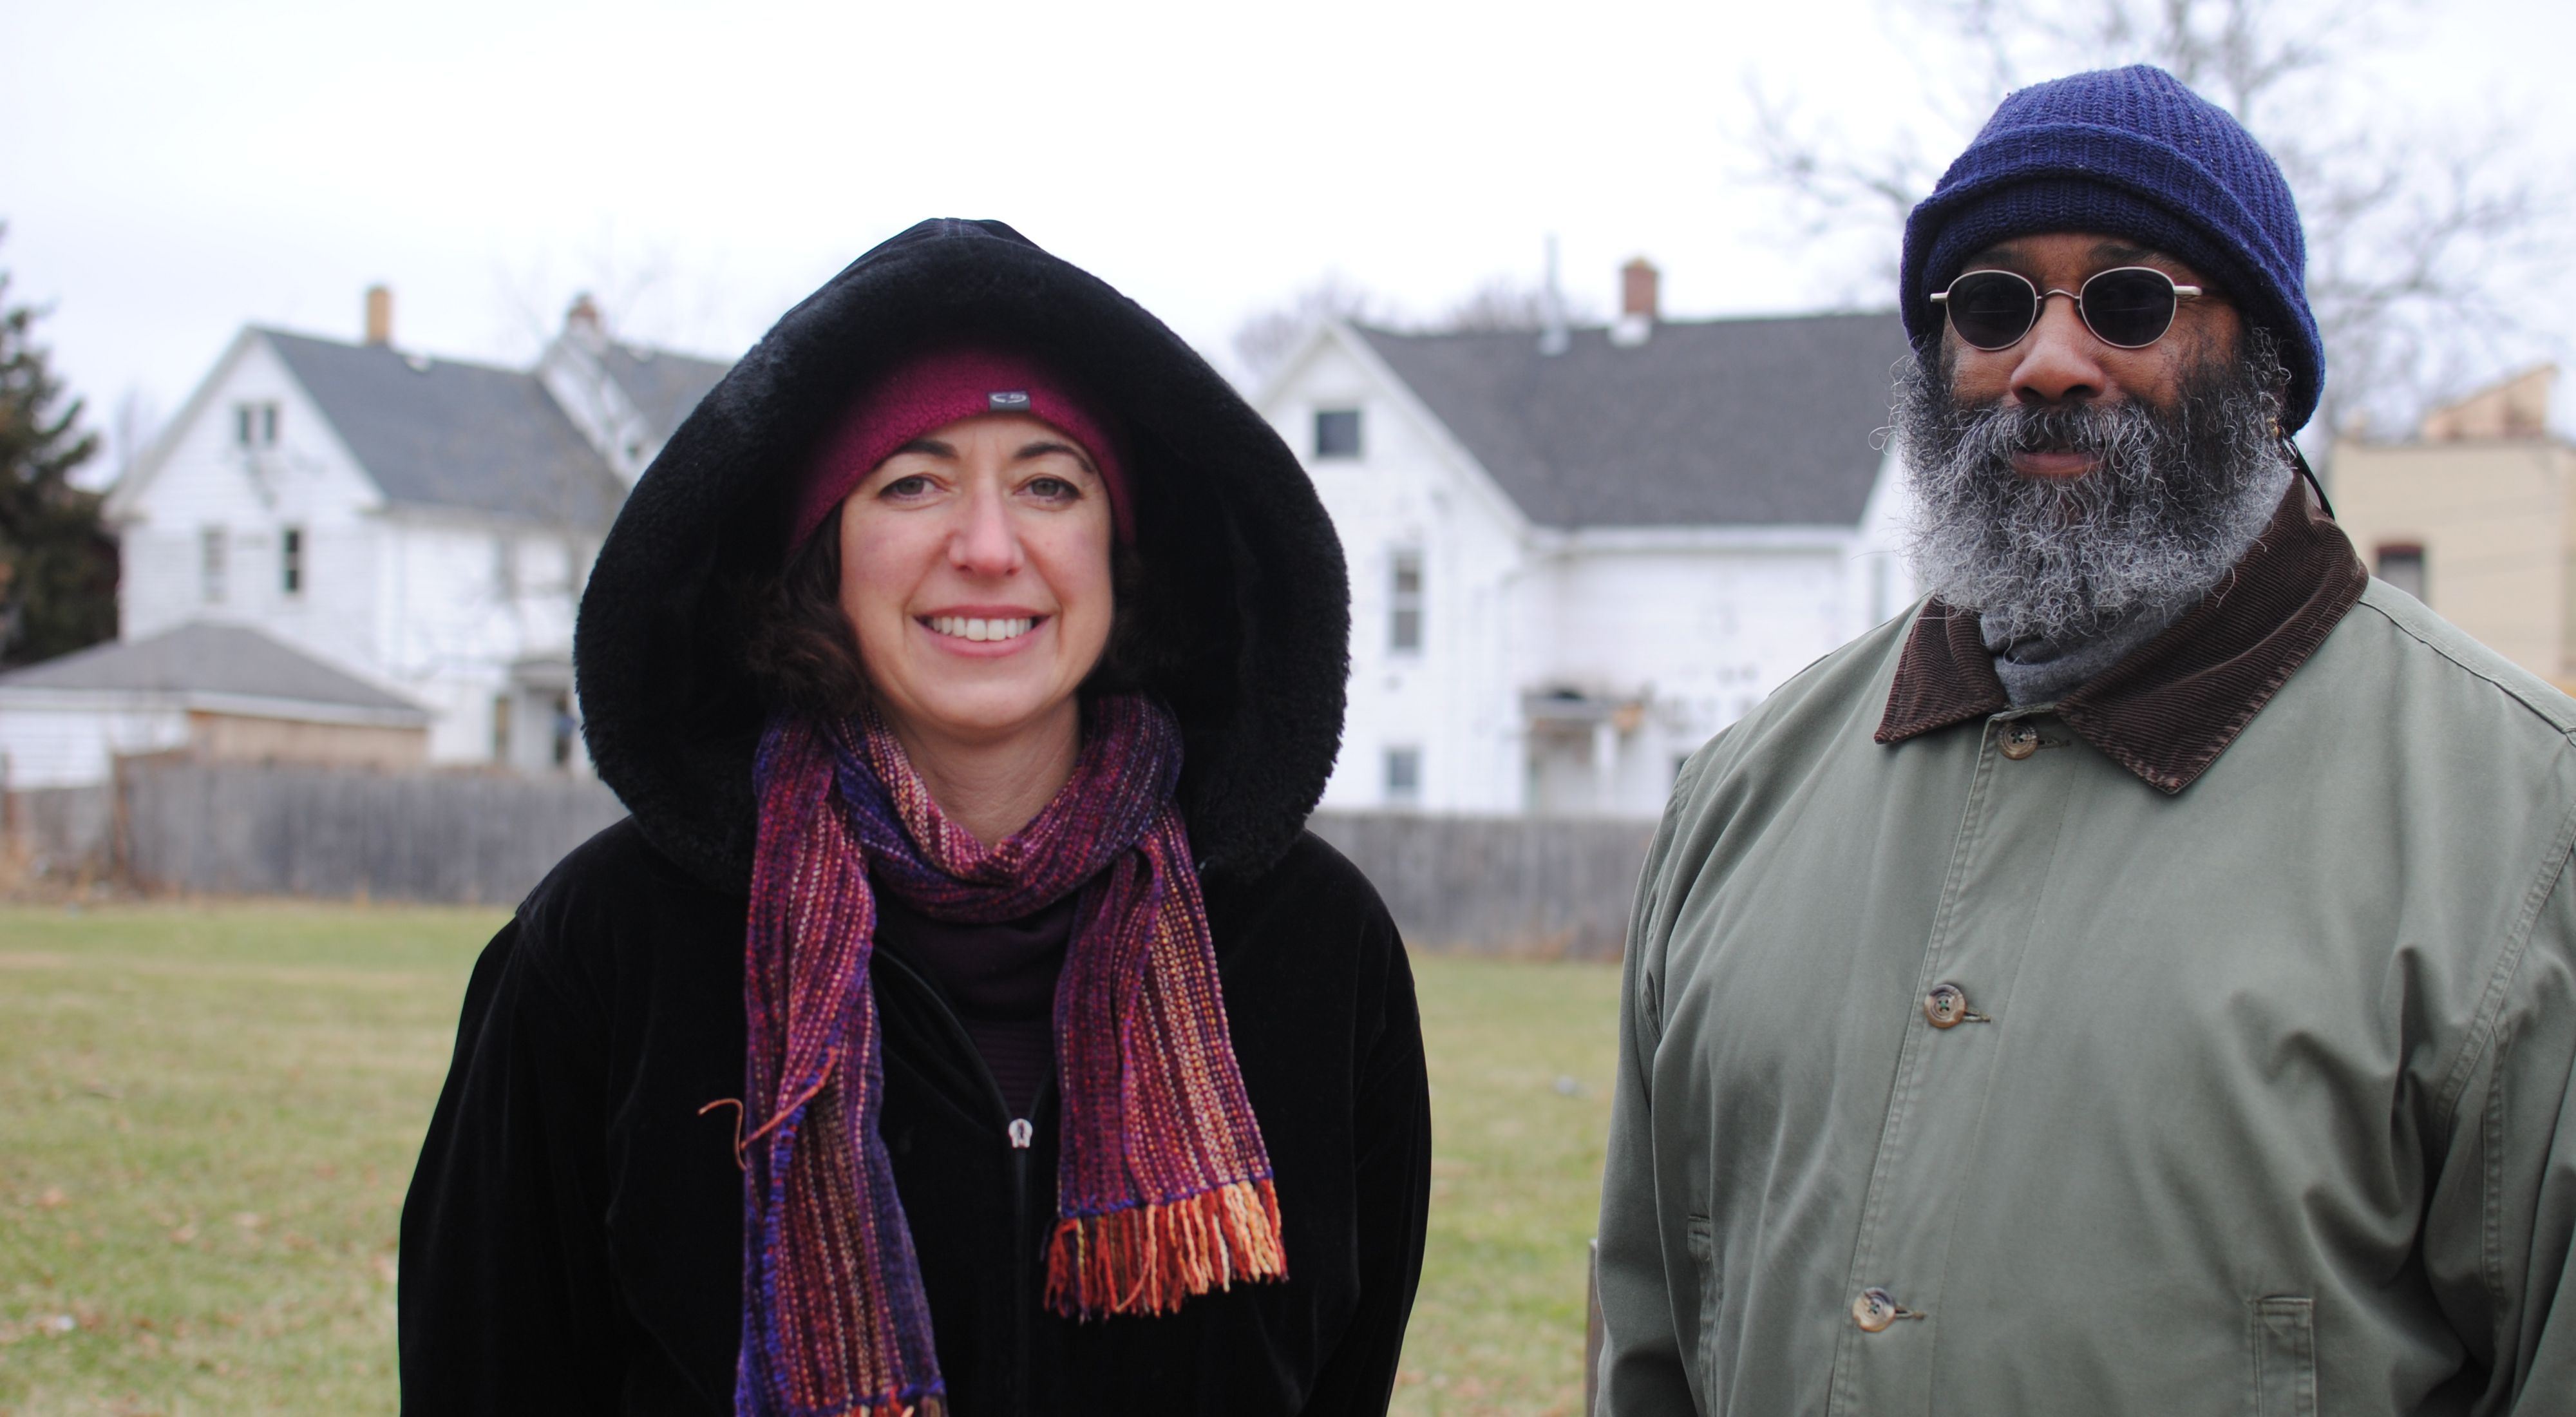 two people standing in cold weather, a woman with a scarf, a man in a blue hat